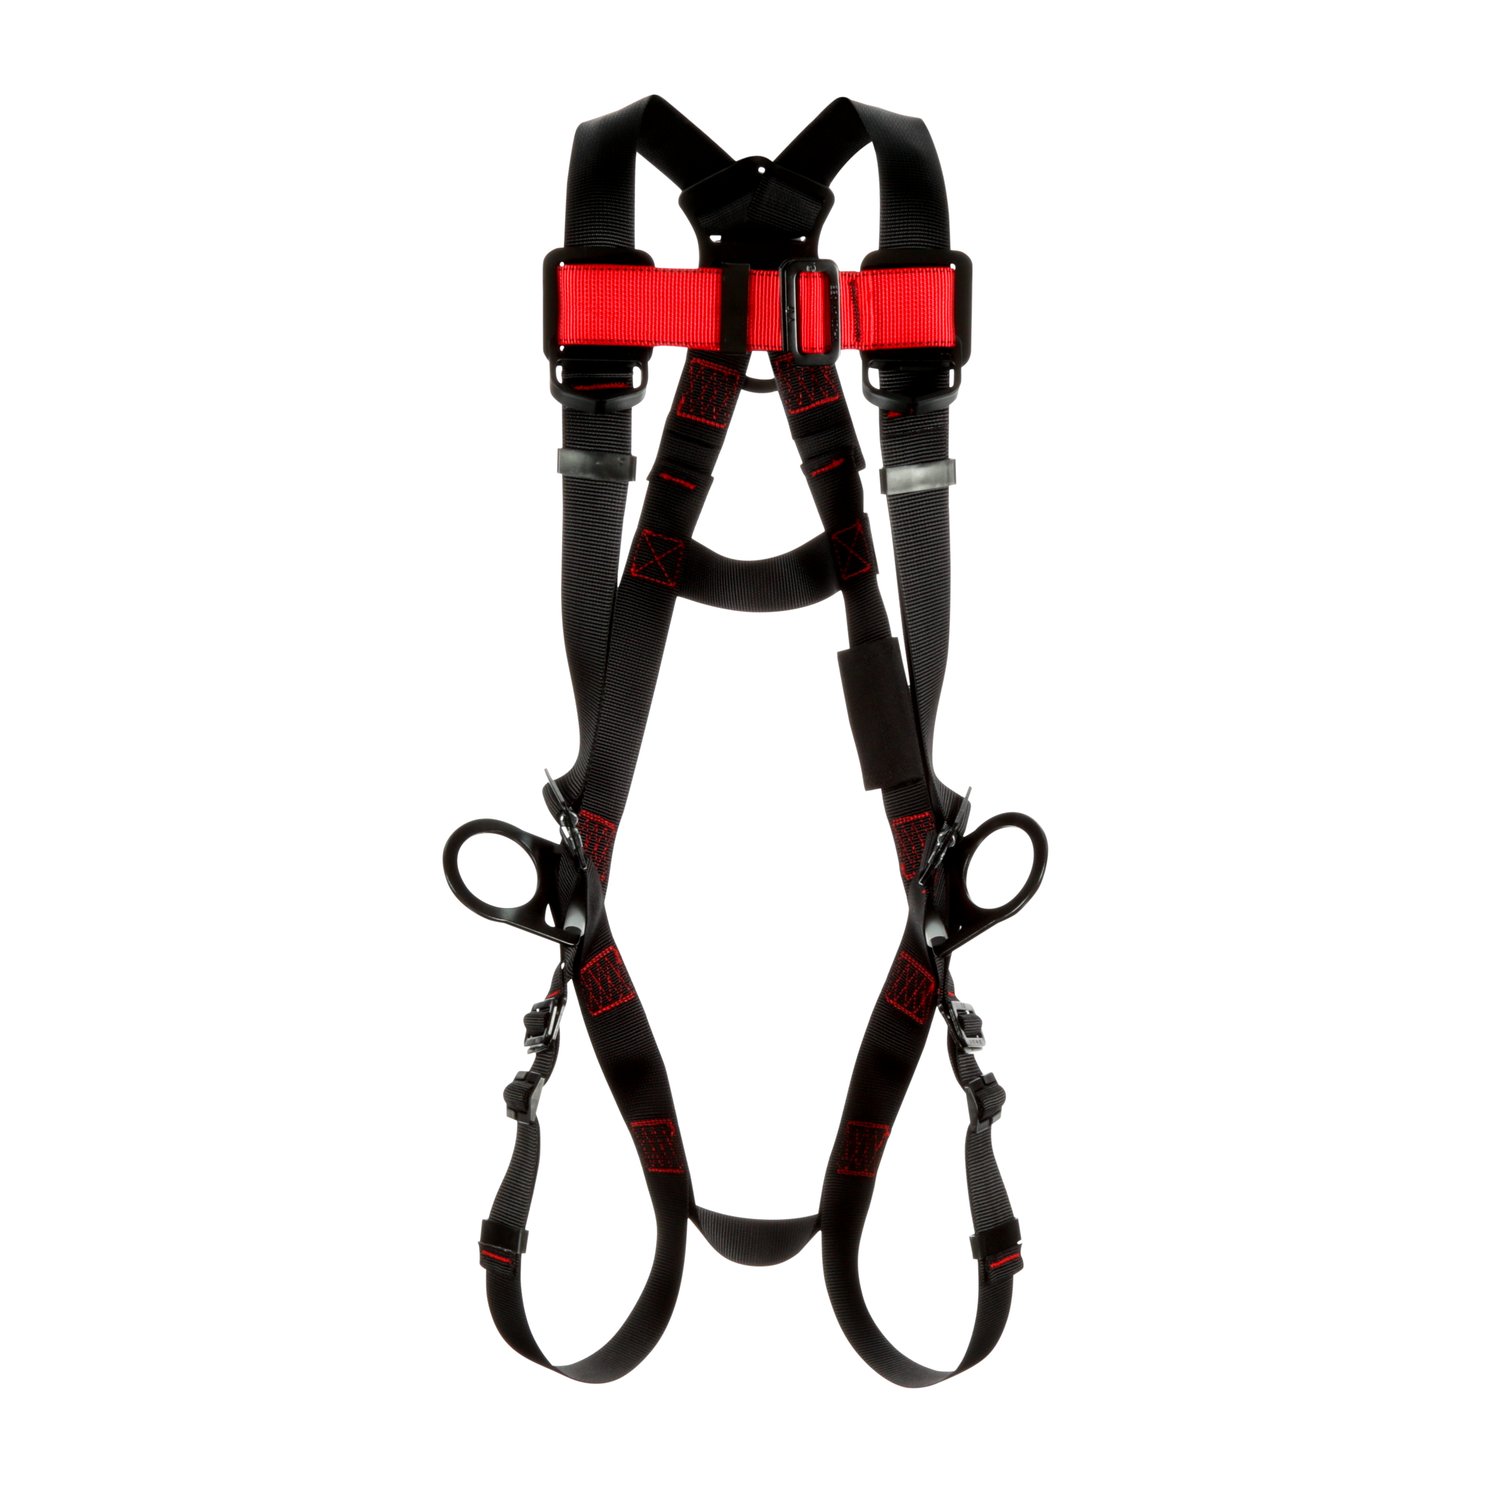 7100184591 - 3M Protecta P200 Vest Positioning Safety Harness 1161561, X-Large